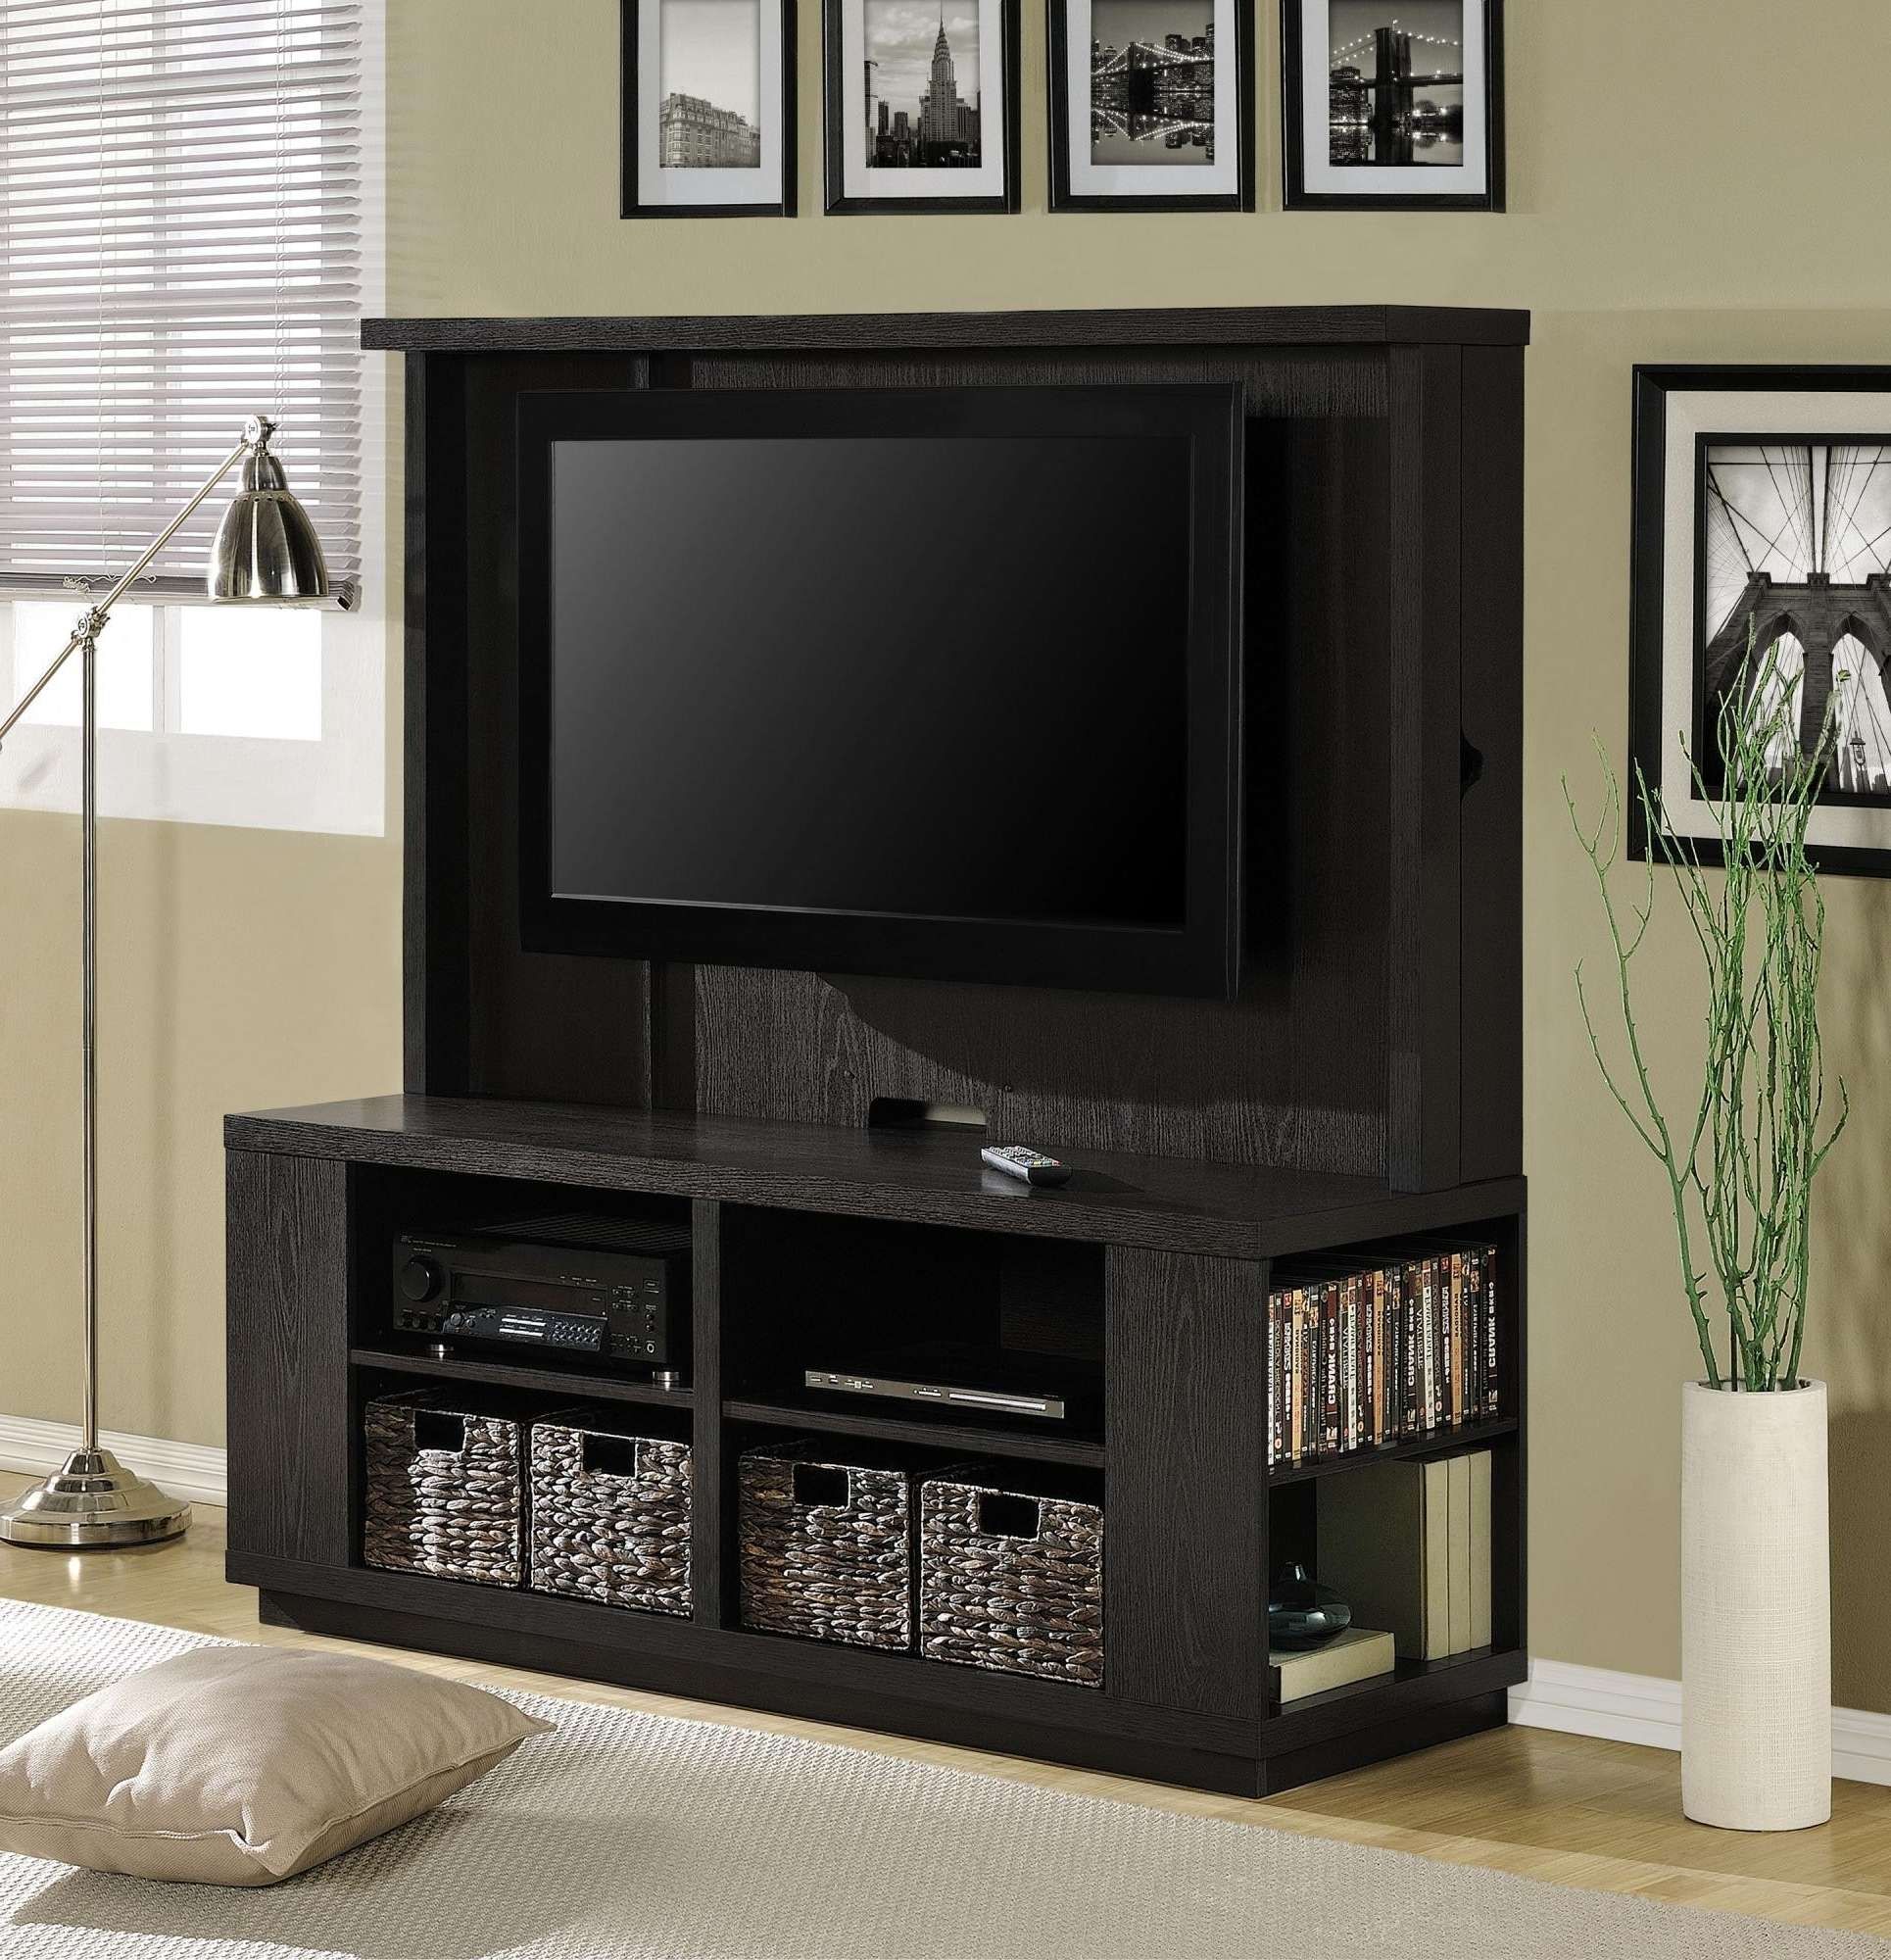 Free Ship Furnishings | 60" Flat Panel Tv Stand Dylan Hec With Regarding Tv Stands With Baskets (Gallery 1 of 15)